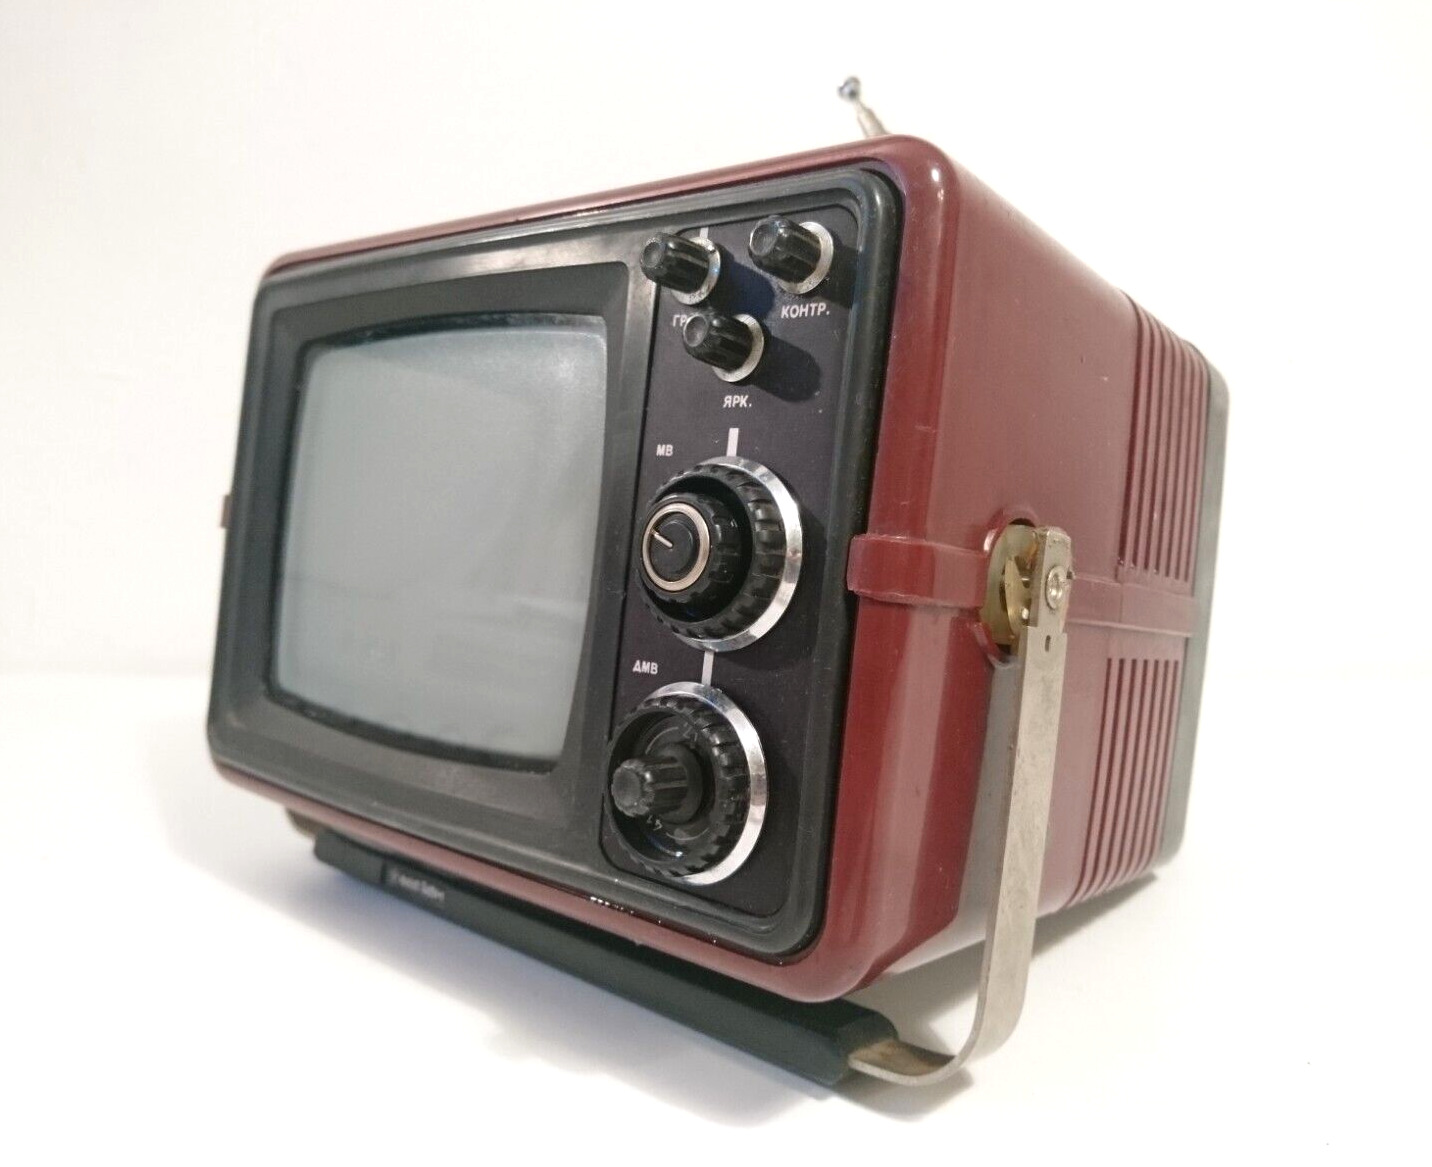 Silelis 402-d 1 Retro Mini Tv, Space Age Television Made In Lithuania Ussr 1970s